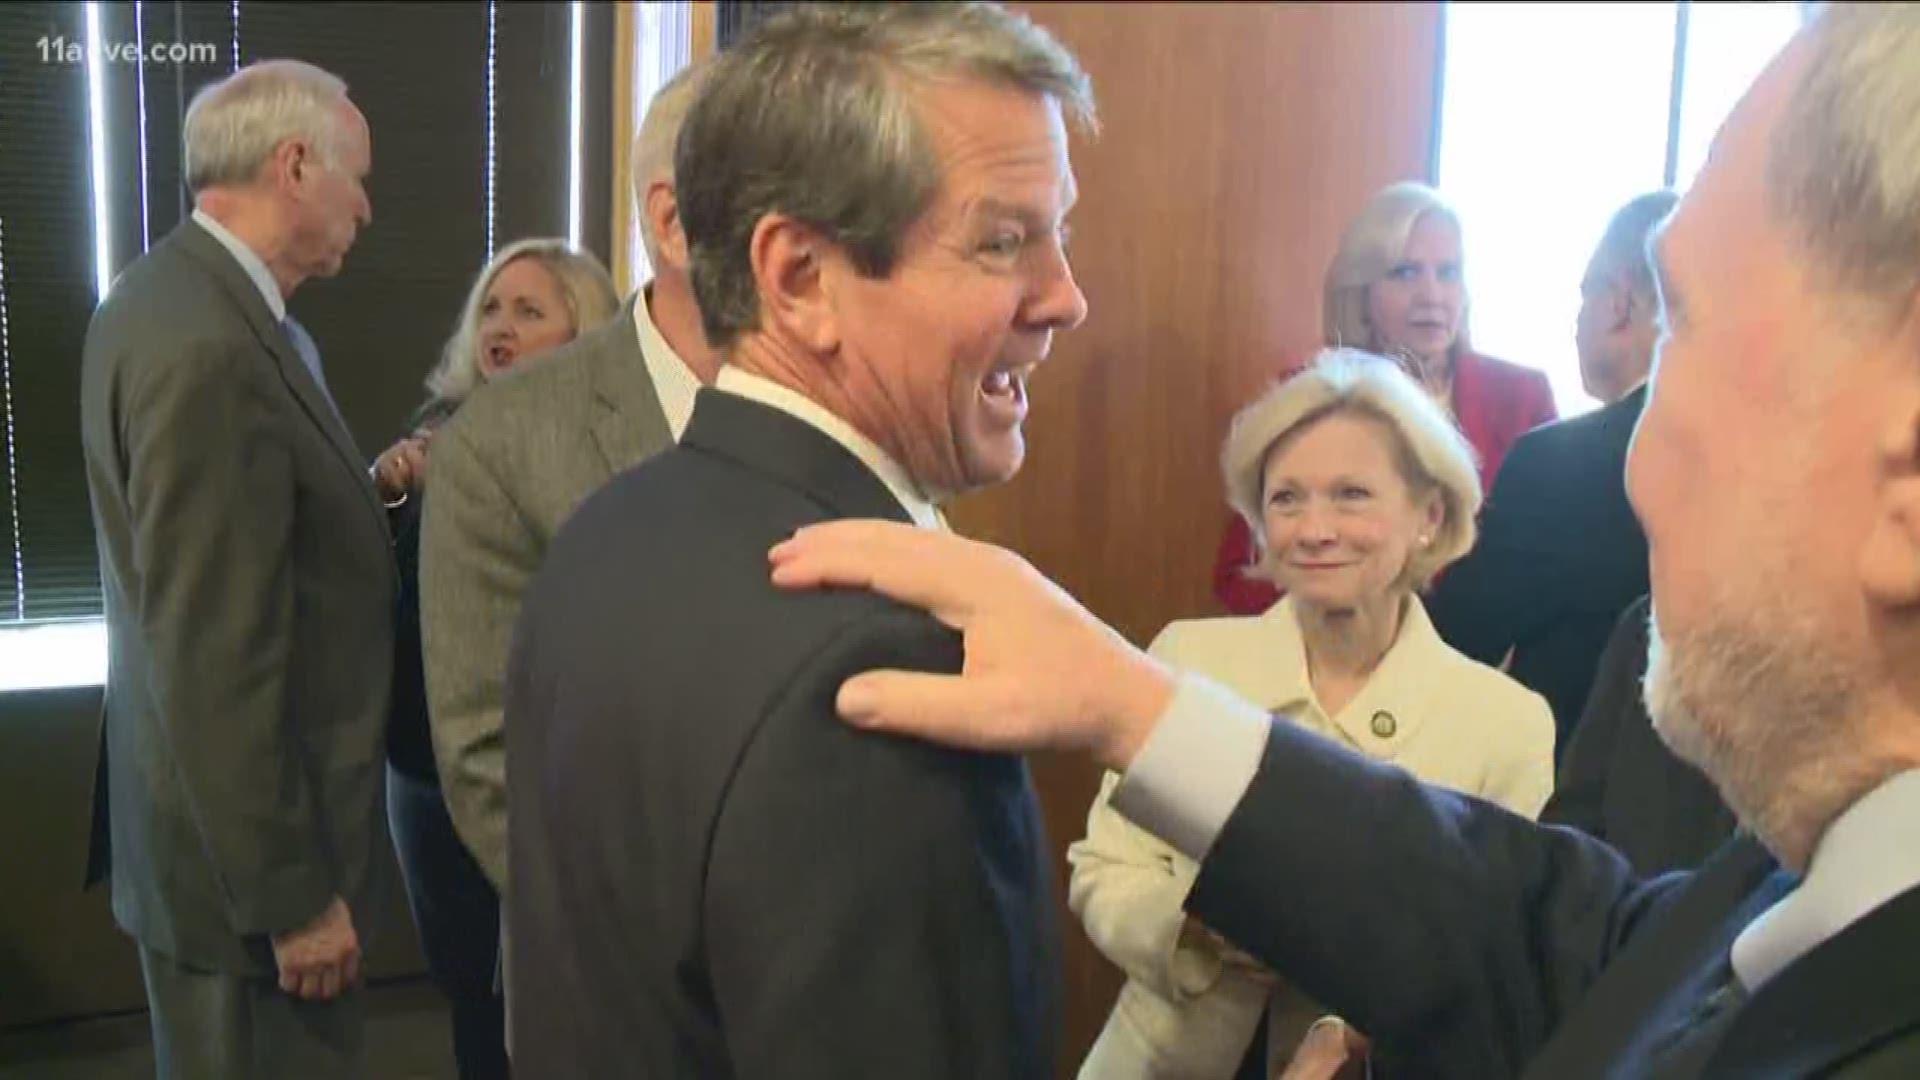 Brian Kemp spent his first full business day as Georgia's acknowledged governor-elect by introducing members of his transition team, which includes former Georgia congressman Tom Price.